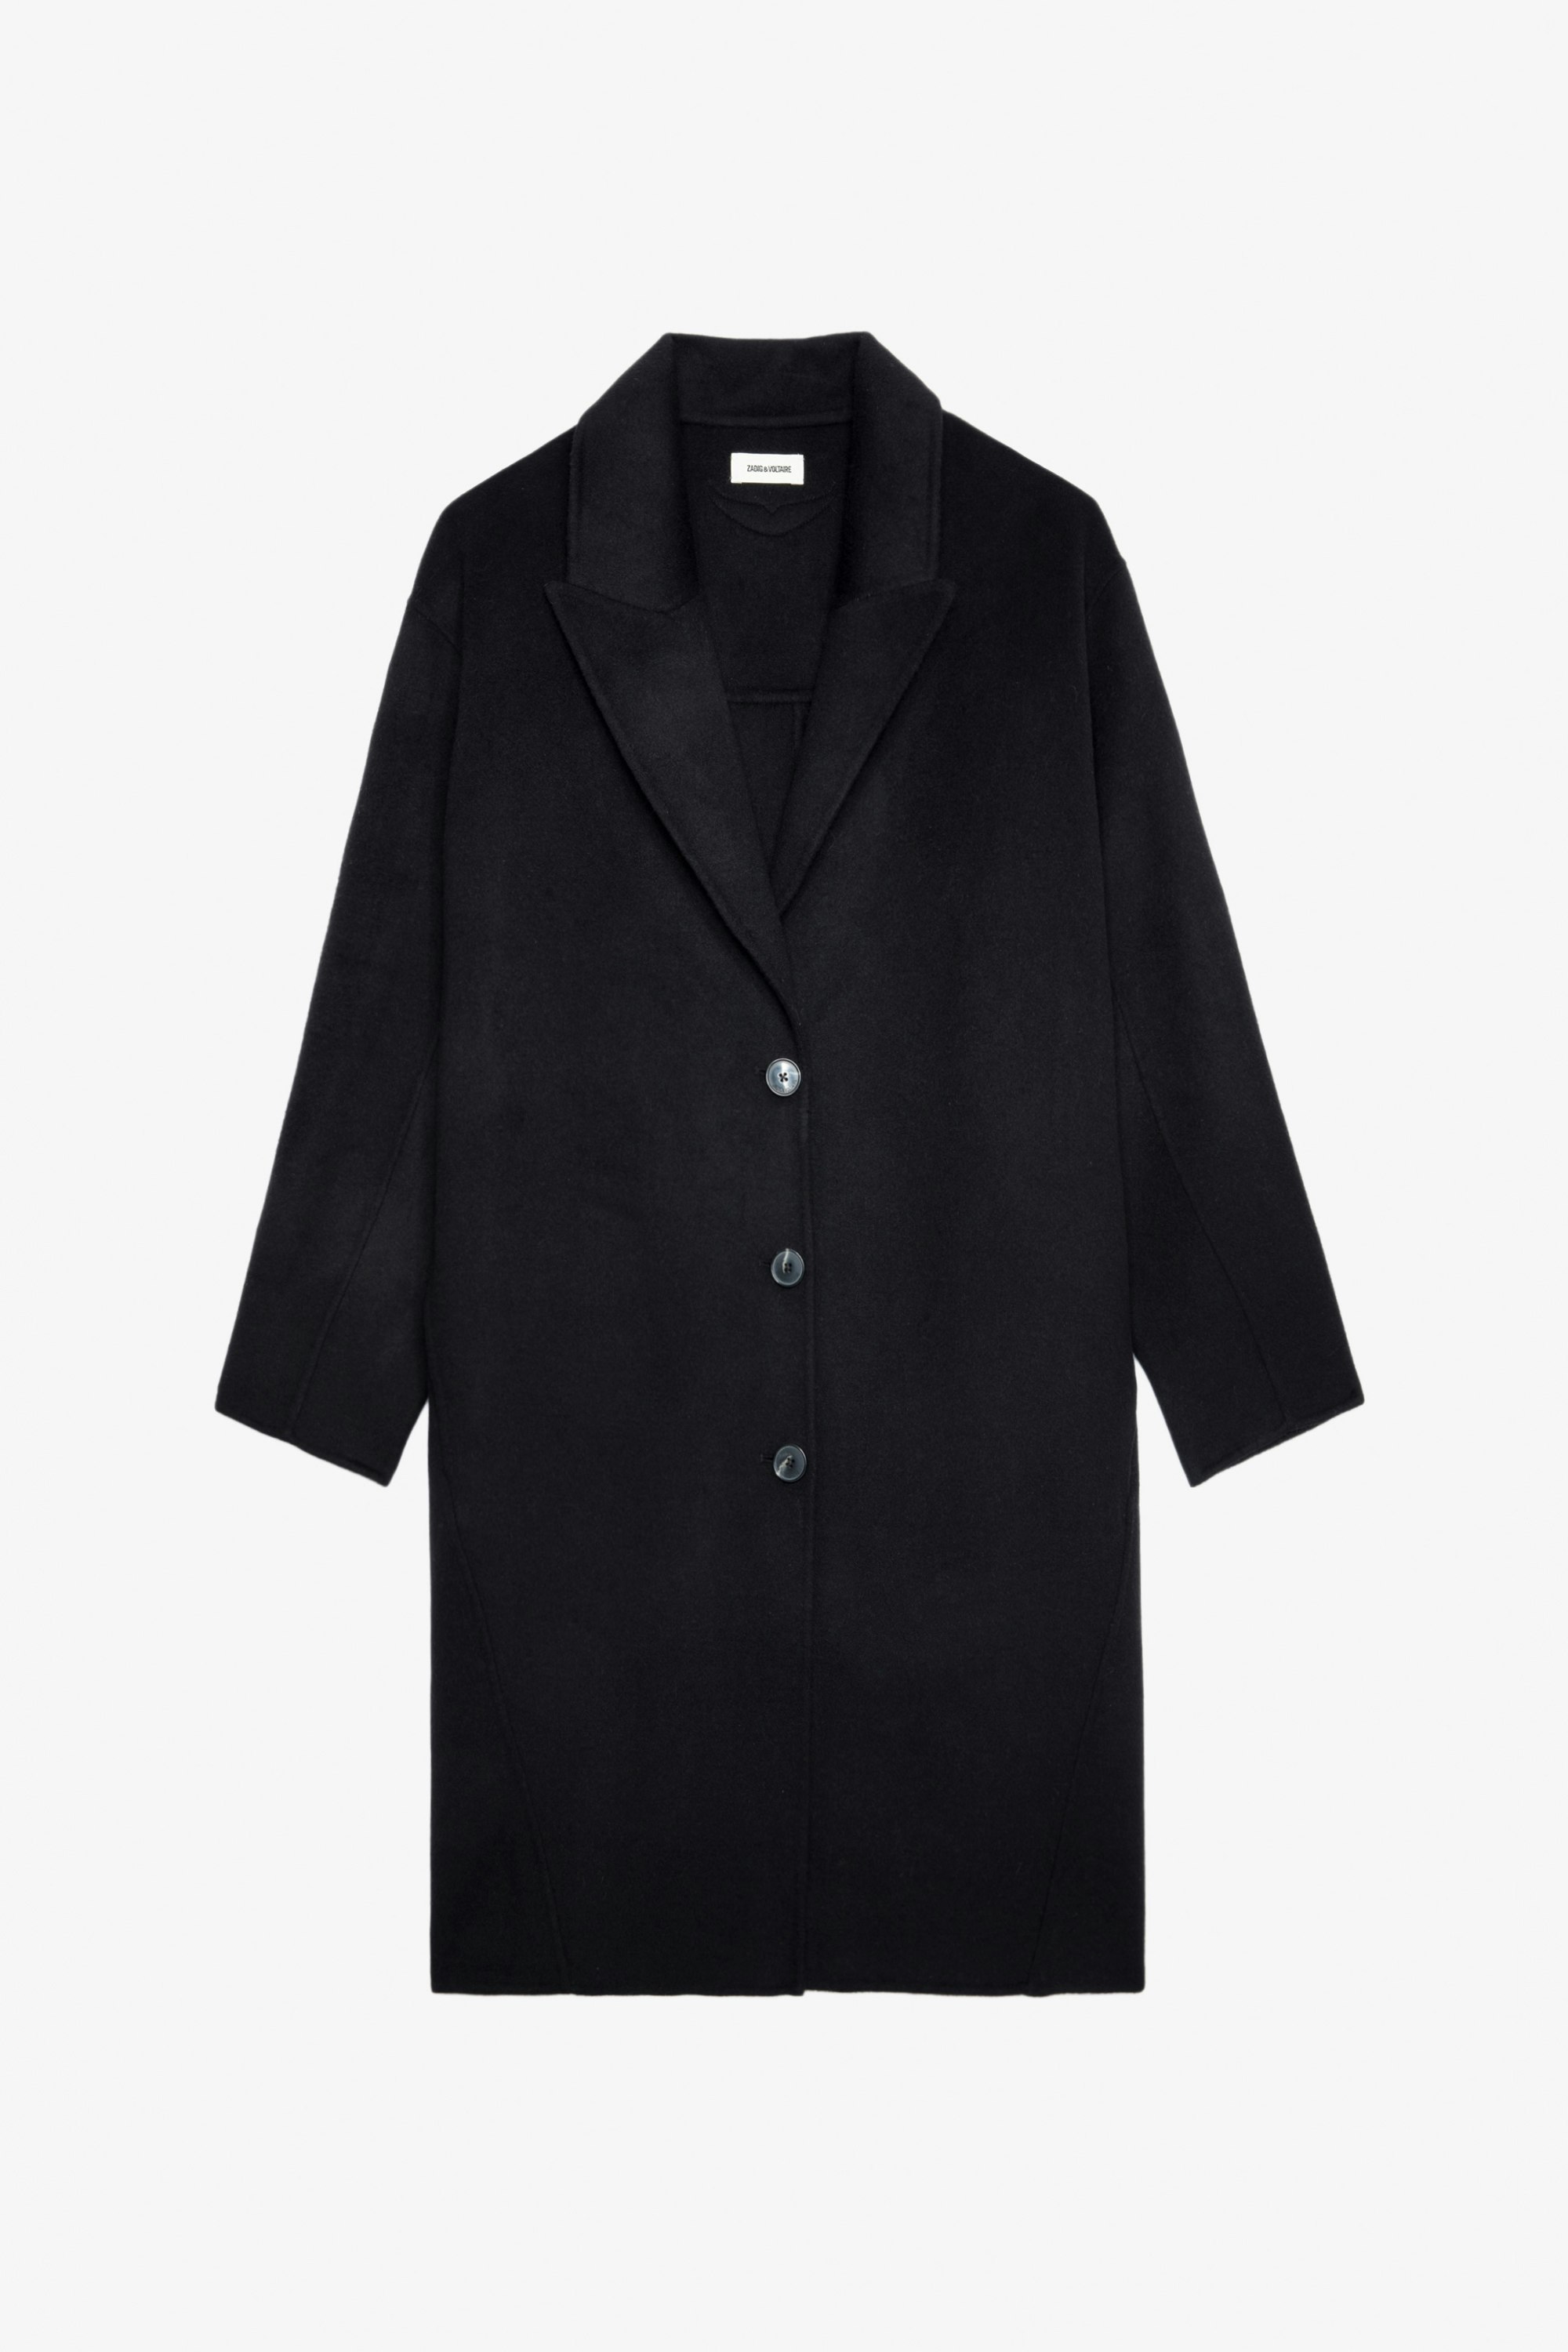 Mady コート - Women’s long black wool mix coat with wings motif on the back.